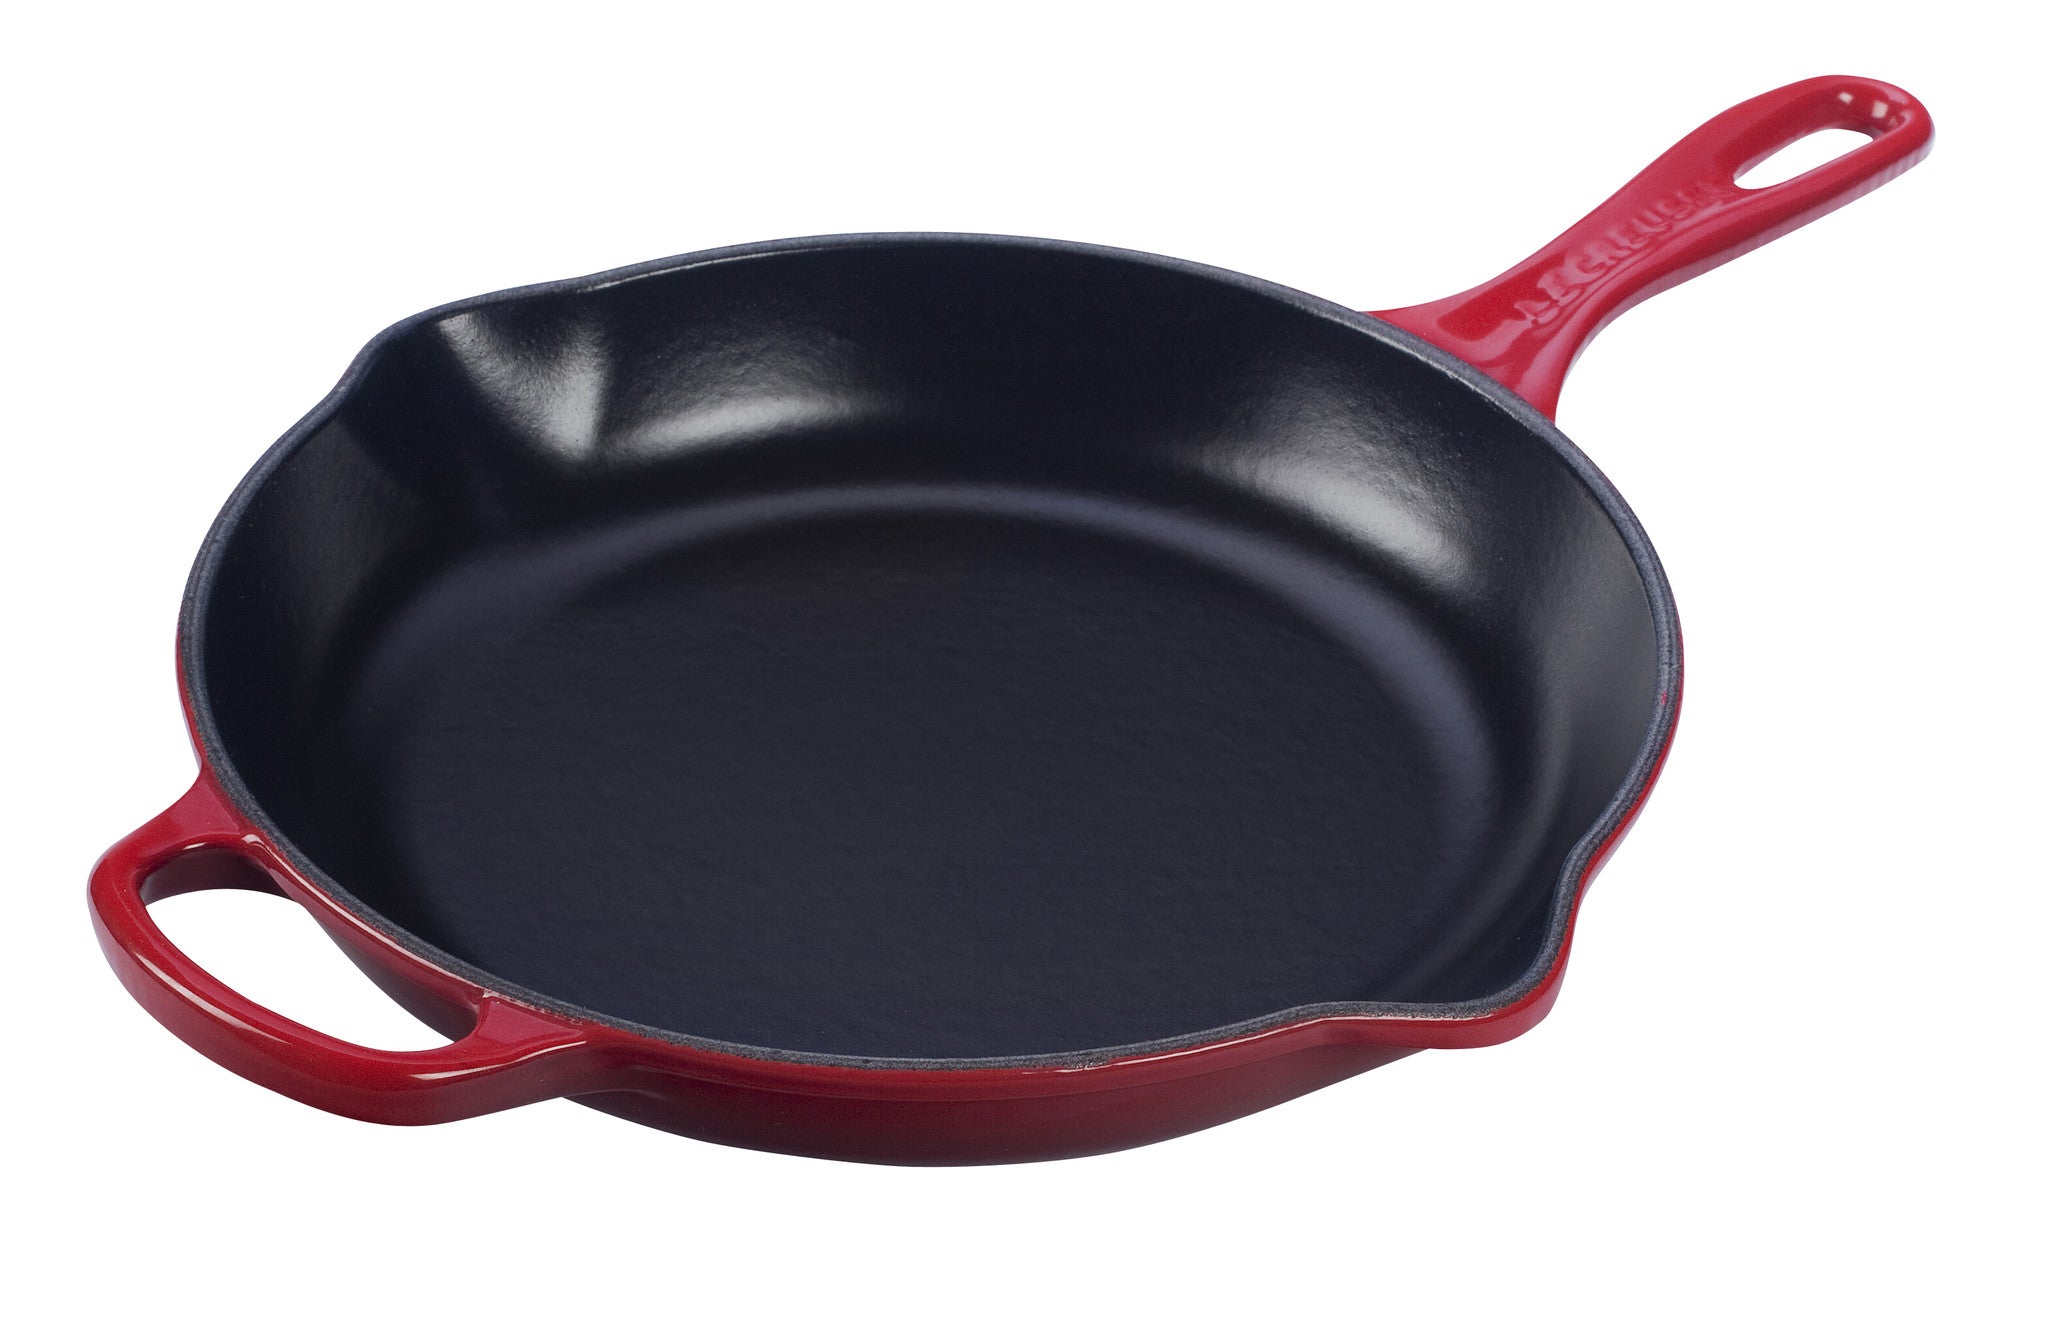 Avoid Cast-Iron Pans When Making Casserole With Highly Acidic Ingredients